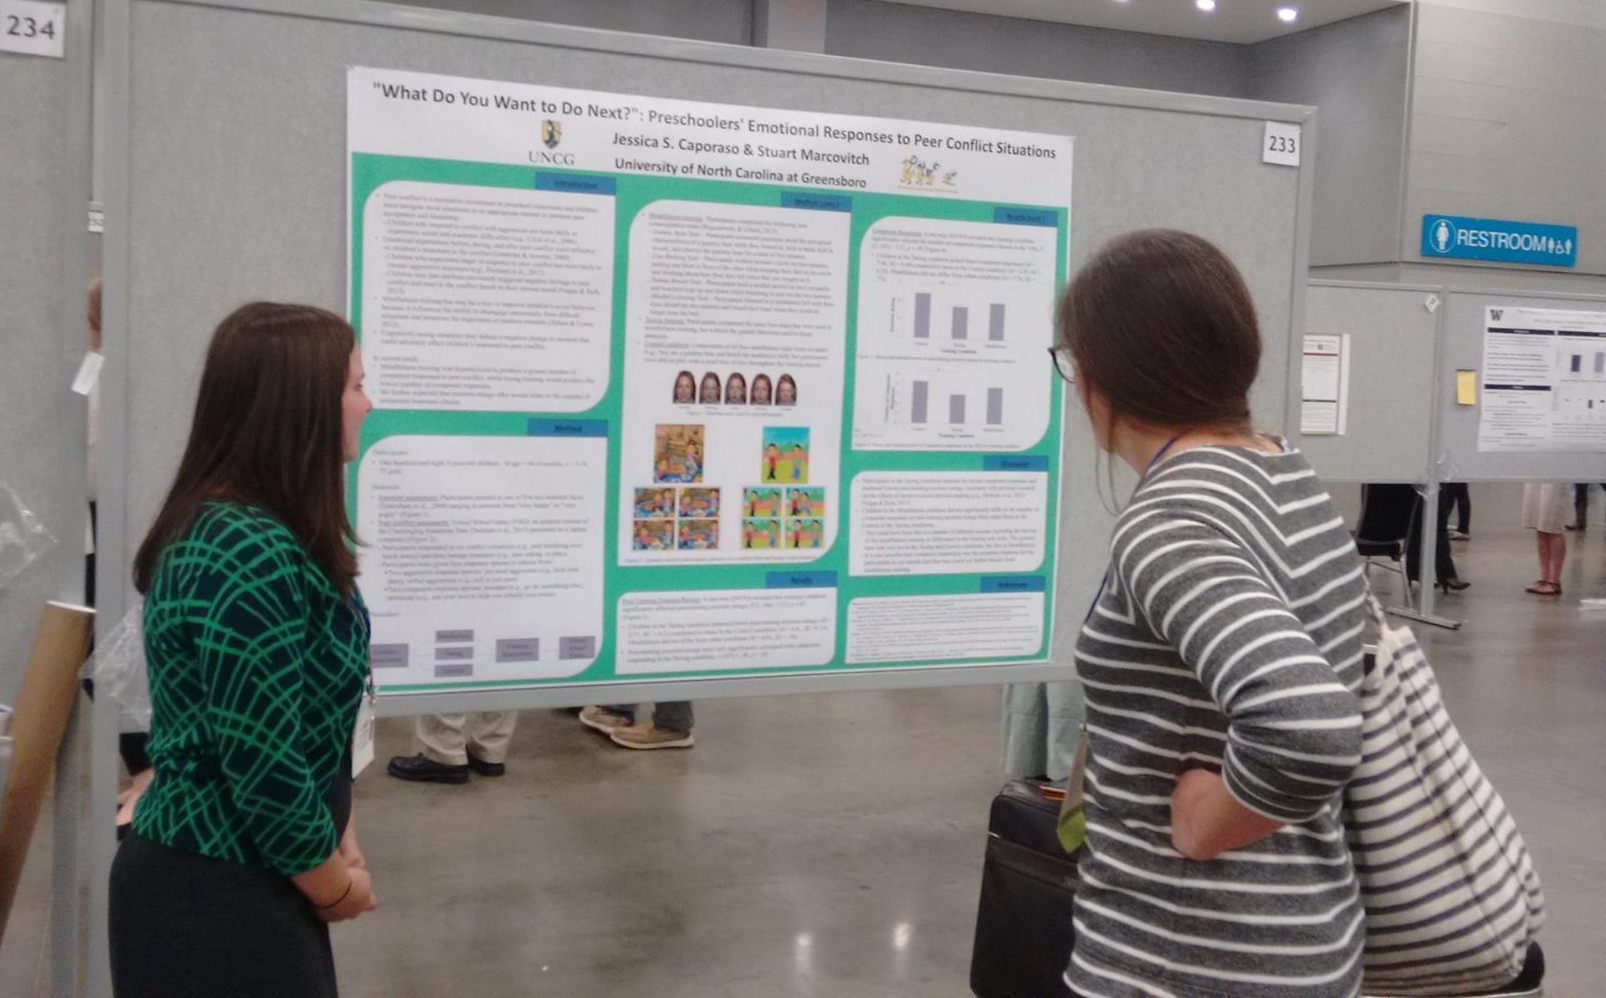  Jessica Caporaso talking to an interested colleague about the effect of children's emotions on peer interactions at SRCD 2017 